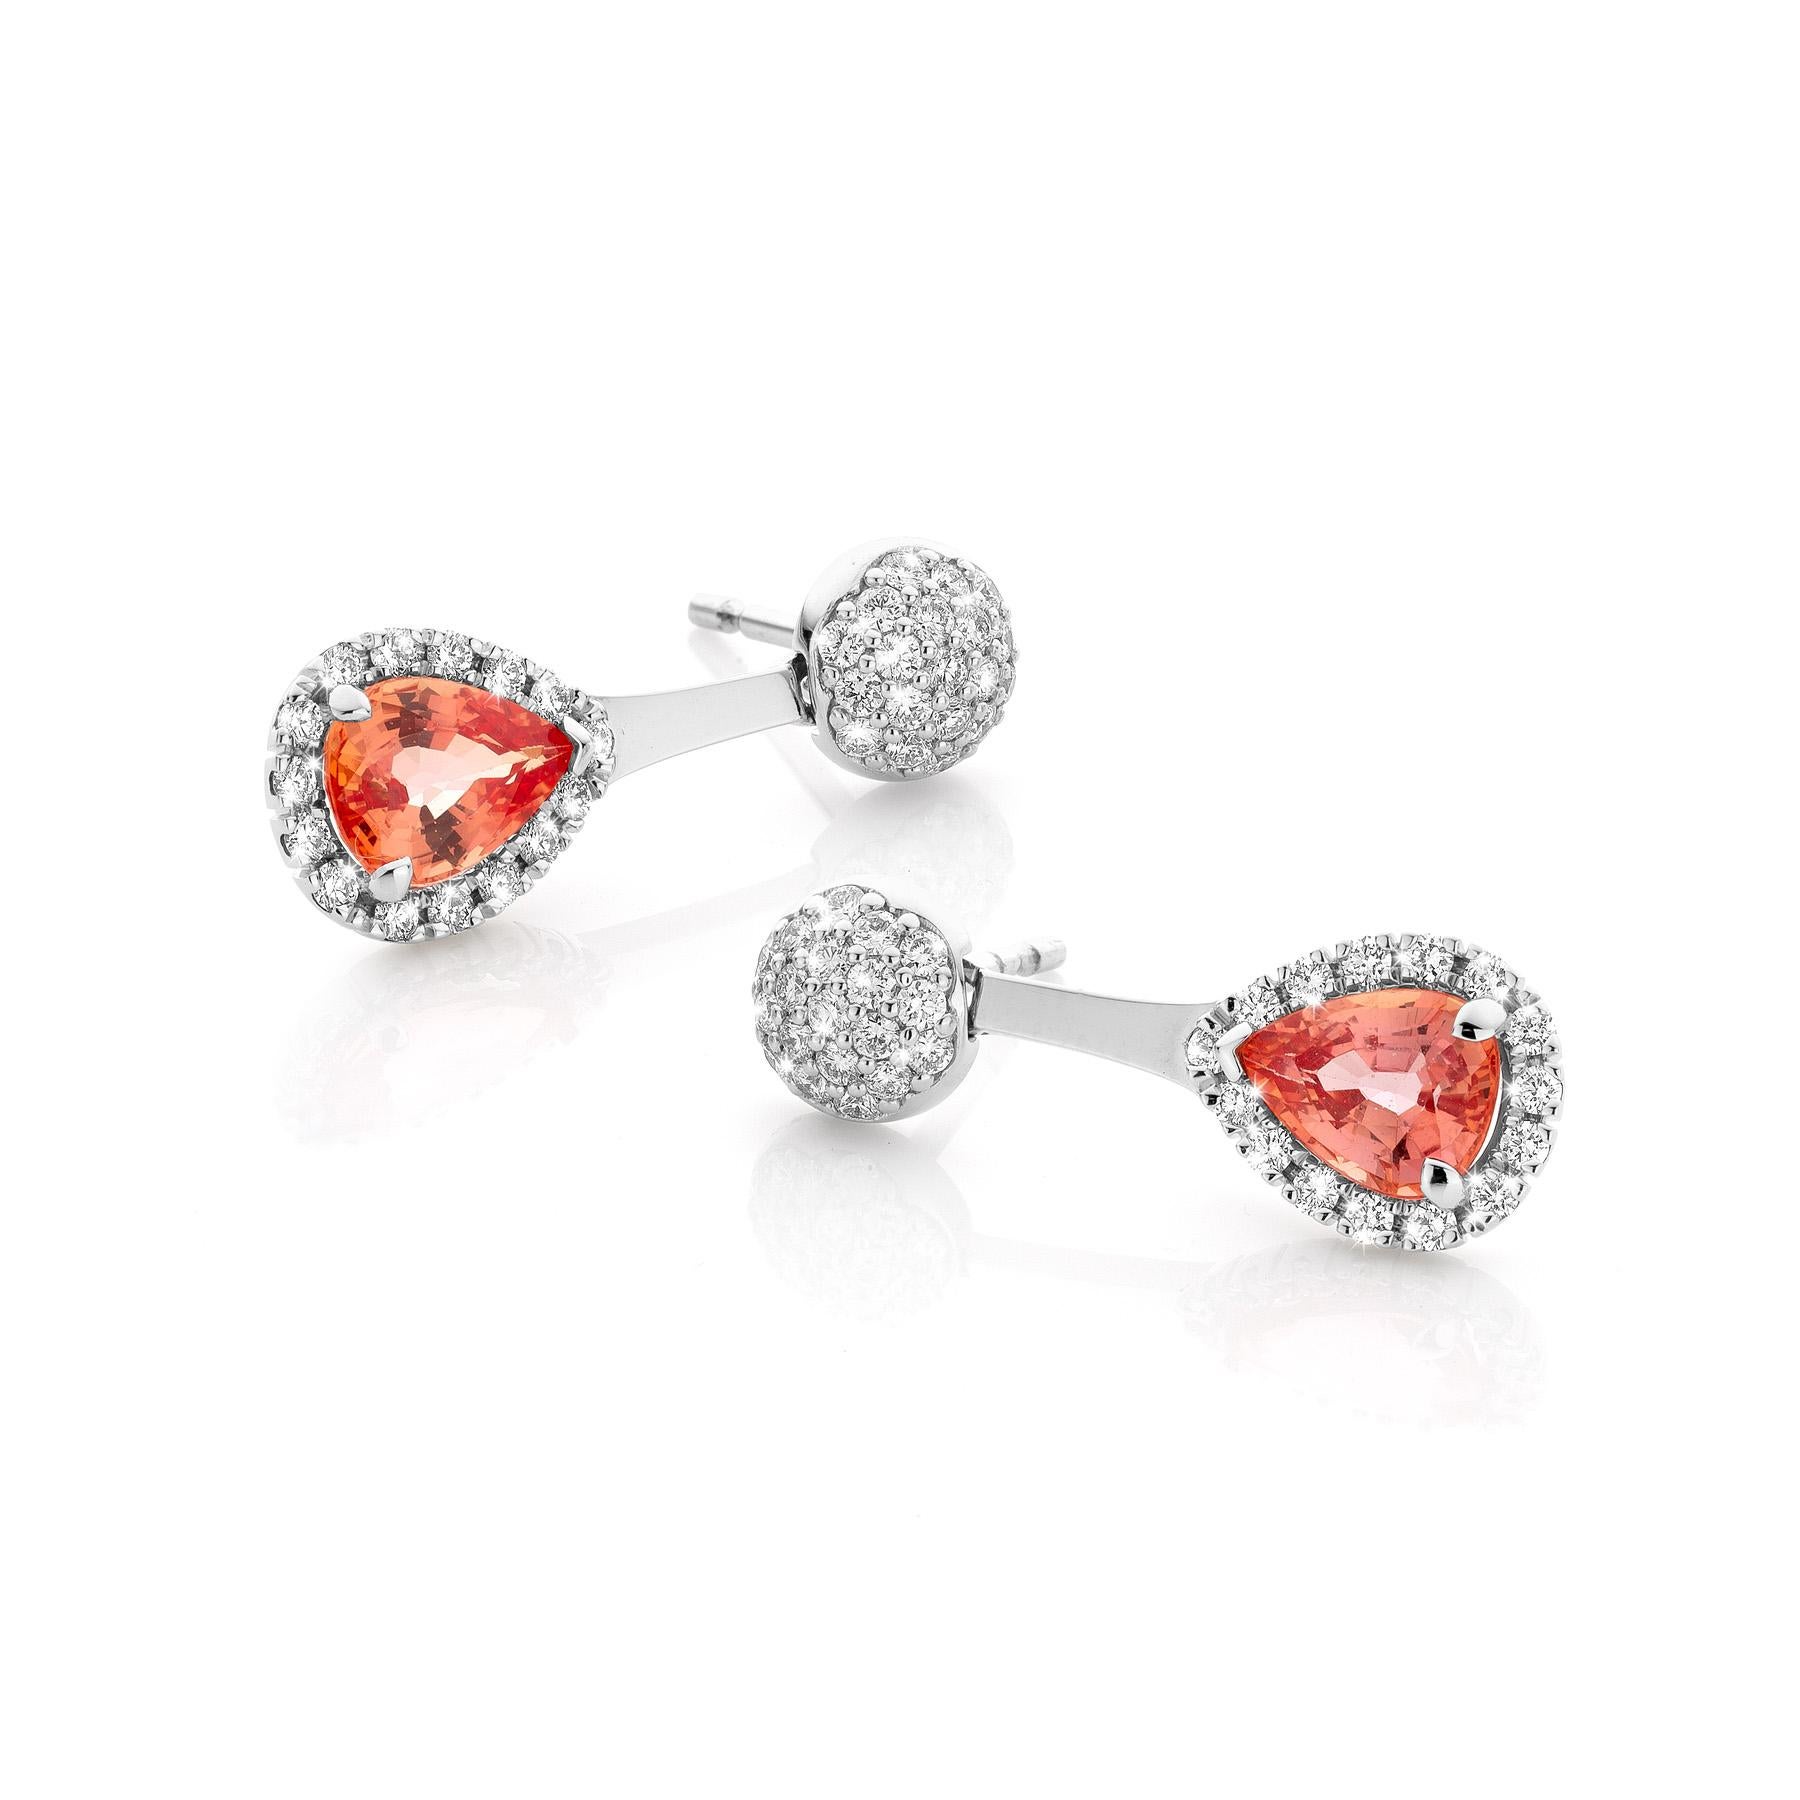 Brilliant Cut Cober with Padparadscha Sapphire surrounded by 15 Diamonds White Gold Earrings For Sale